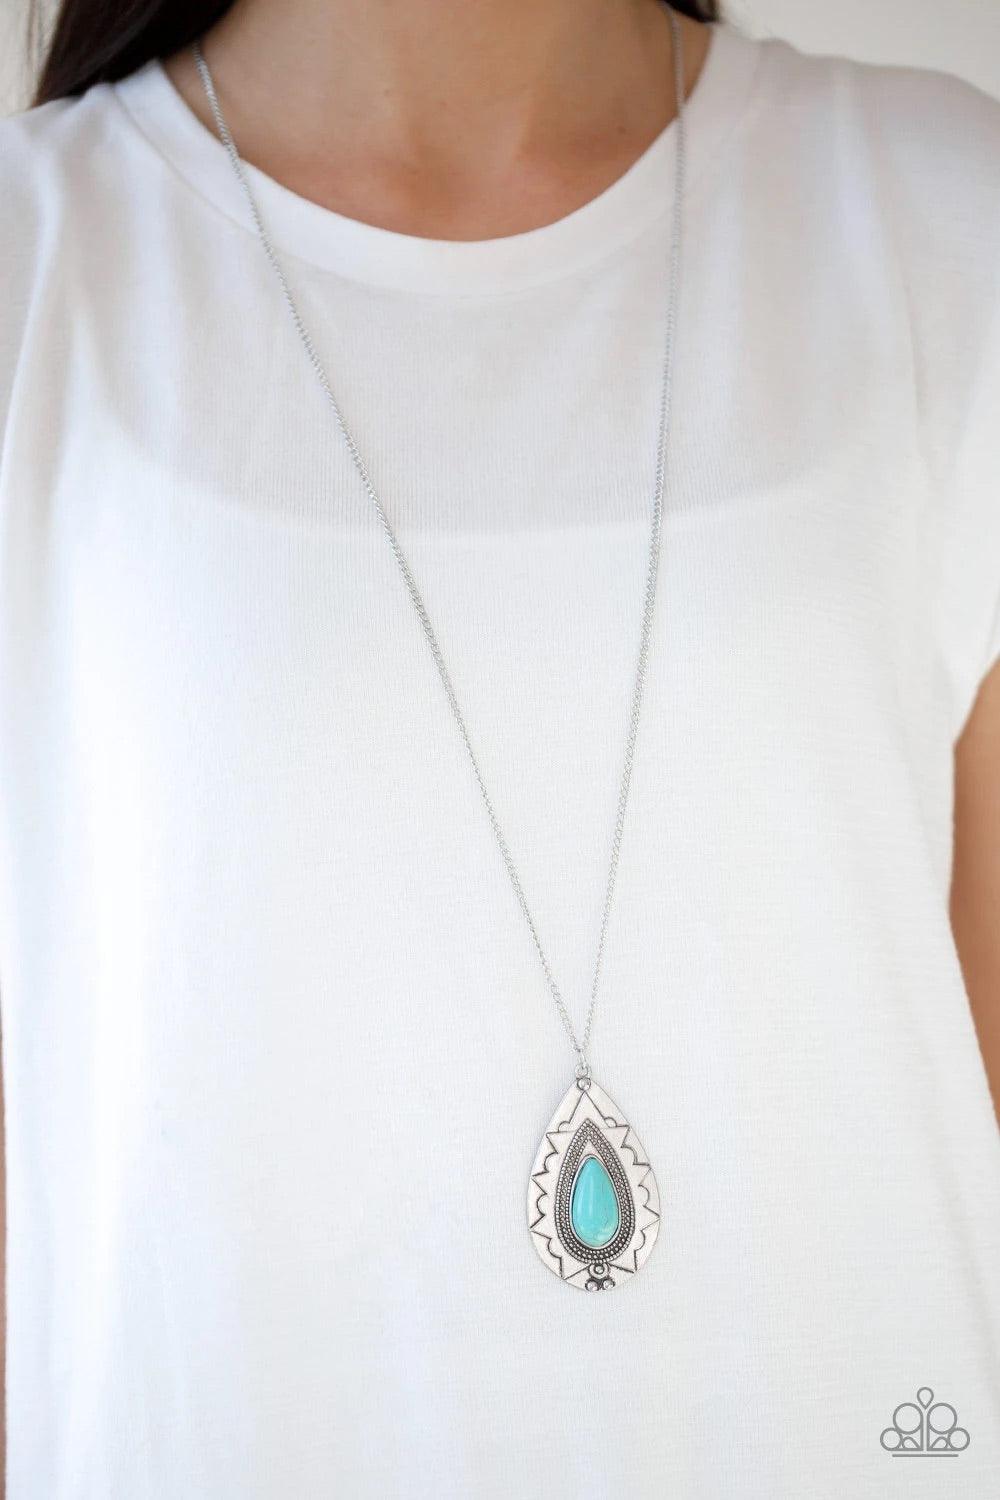 Paparazzi Accessories Sedona Solstice - Blue Chiseled into a tranquil teardrop, a refreshing turquoise stone is pressed into an ornate silver frame. The whimsical pendant swings from the bottom of a lengthened silver chain for a seasonal look. Features an